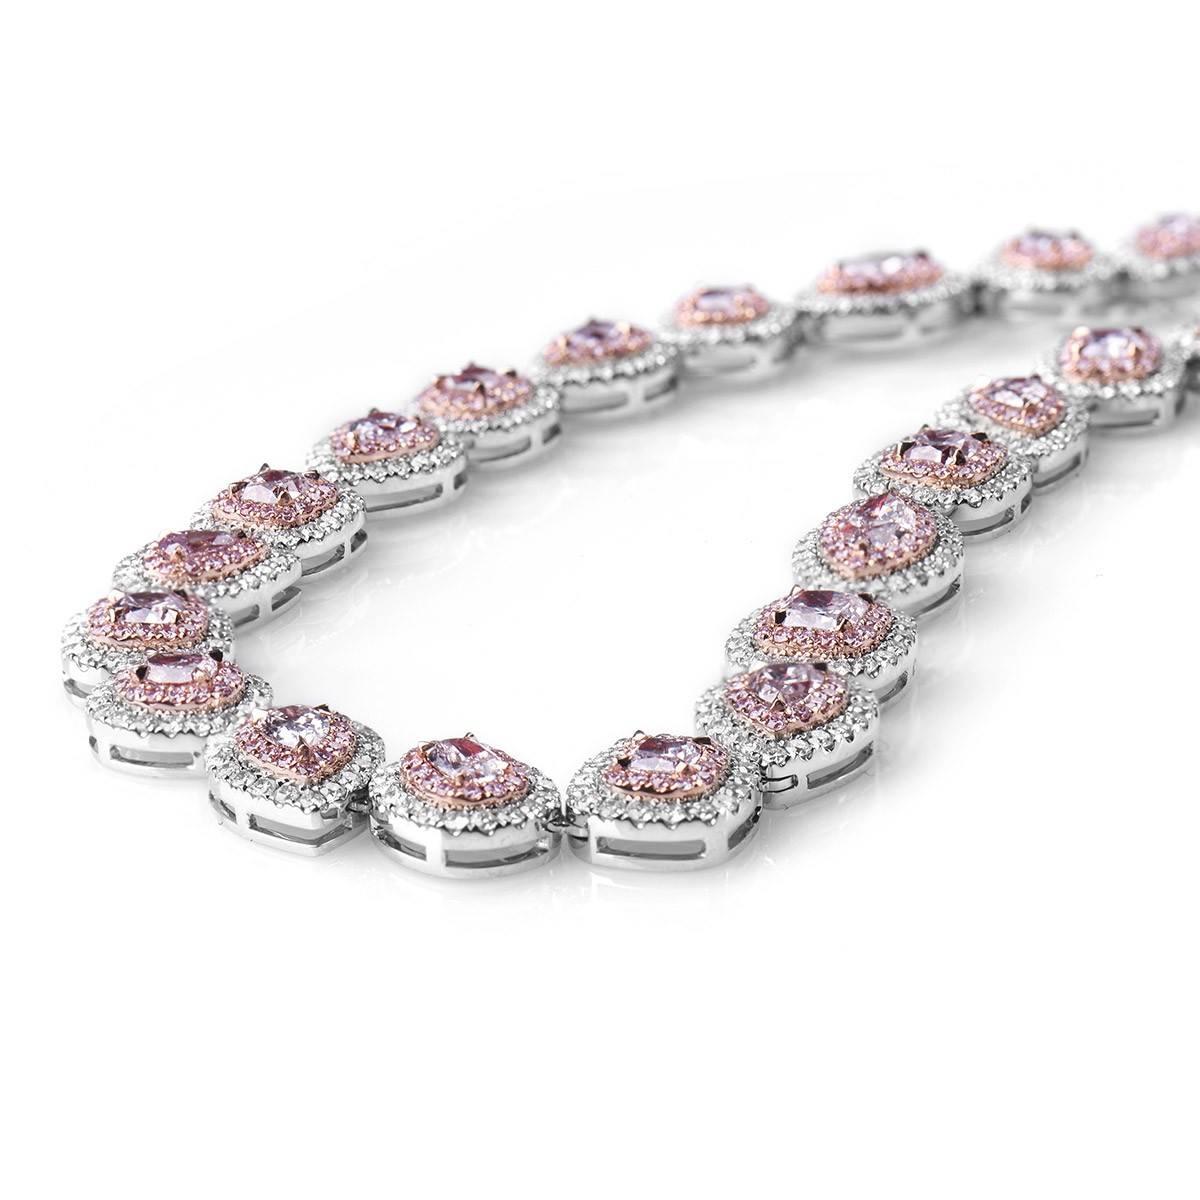 WHITE GOLD FANCY PINK DIAMOND NECKLACE - 16.11 CT

Set in 18Kt White gold


Total centre diamond weight: 8.44 ct
[ 43 diamonds ]
Color: Fancy pink
Clarity: SI

Total side diamond weight: 7.67 ct
[ 1407 diamonds ]
Color: Fancy Pink
White diamond